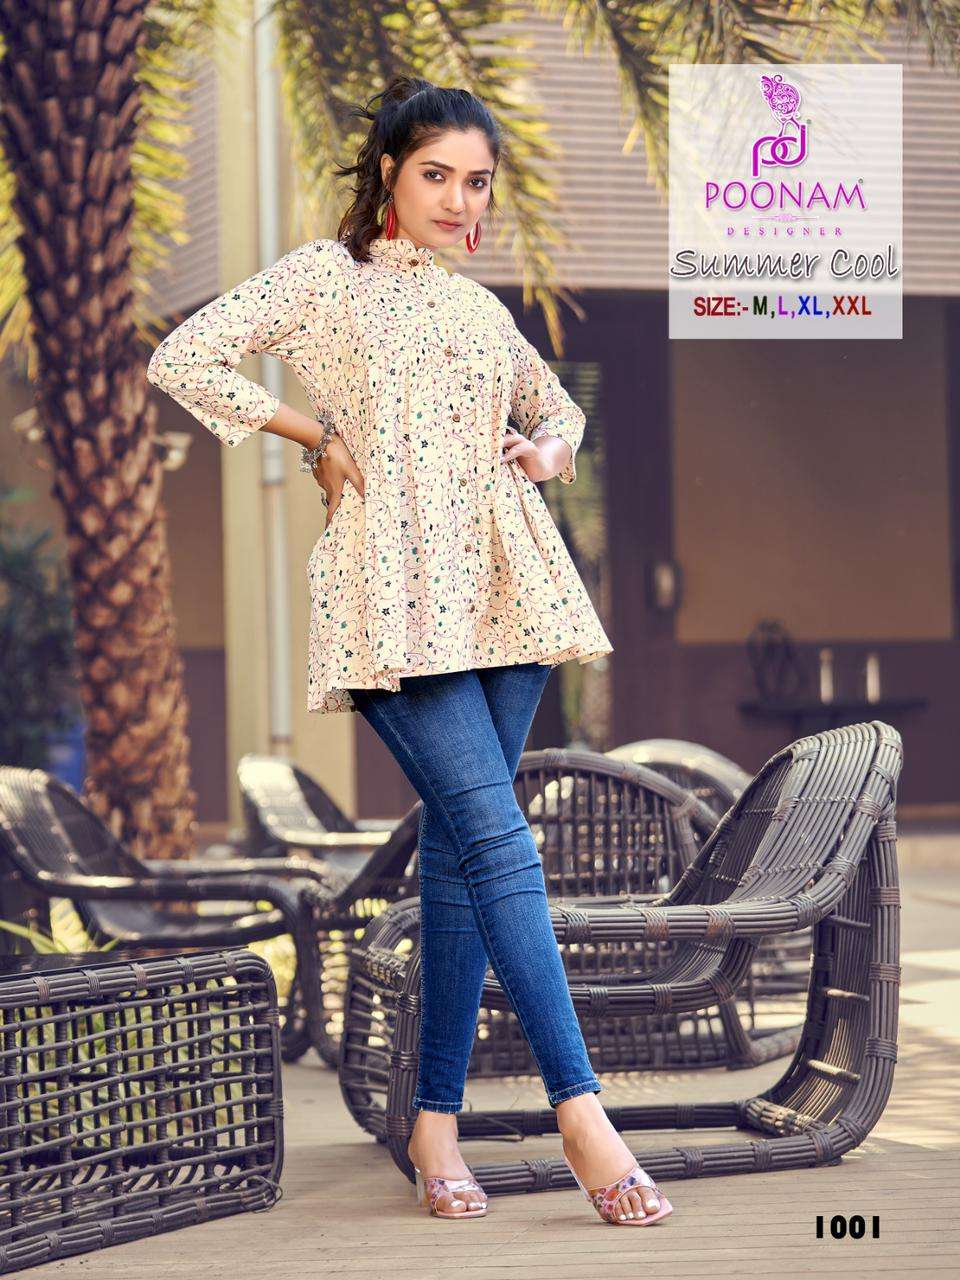 POONAM DESIGNER PRESENTS SUMMER COOL COTTON MAL PRINT WITH BUTTONS WHOLESALE WESTERN TOPS